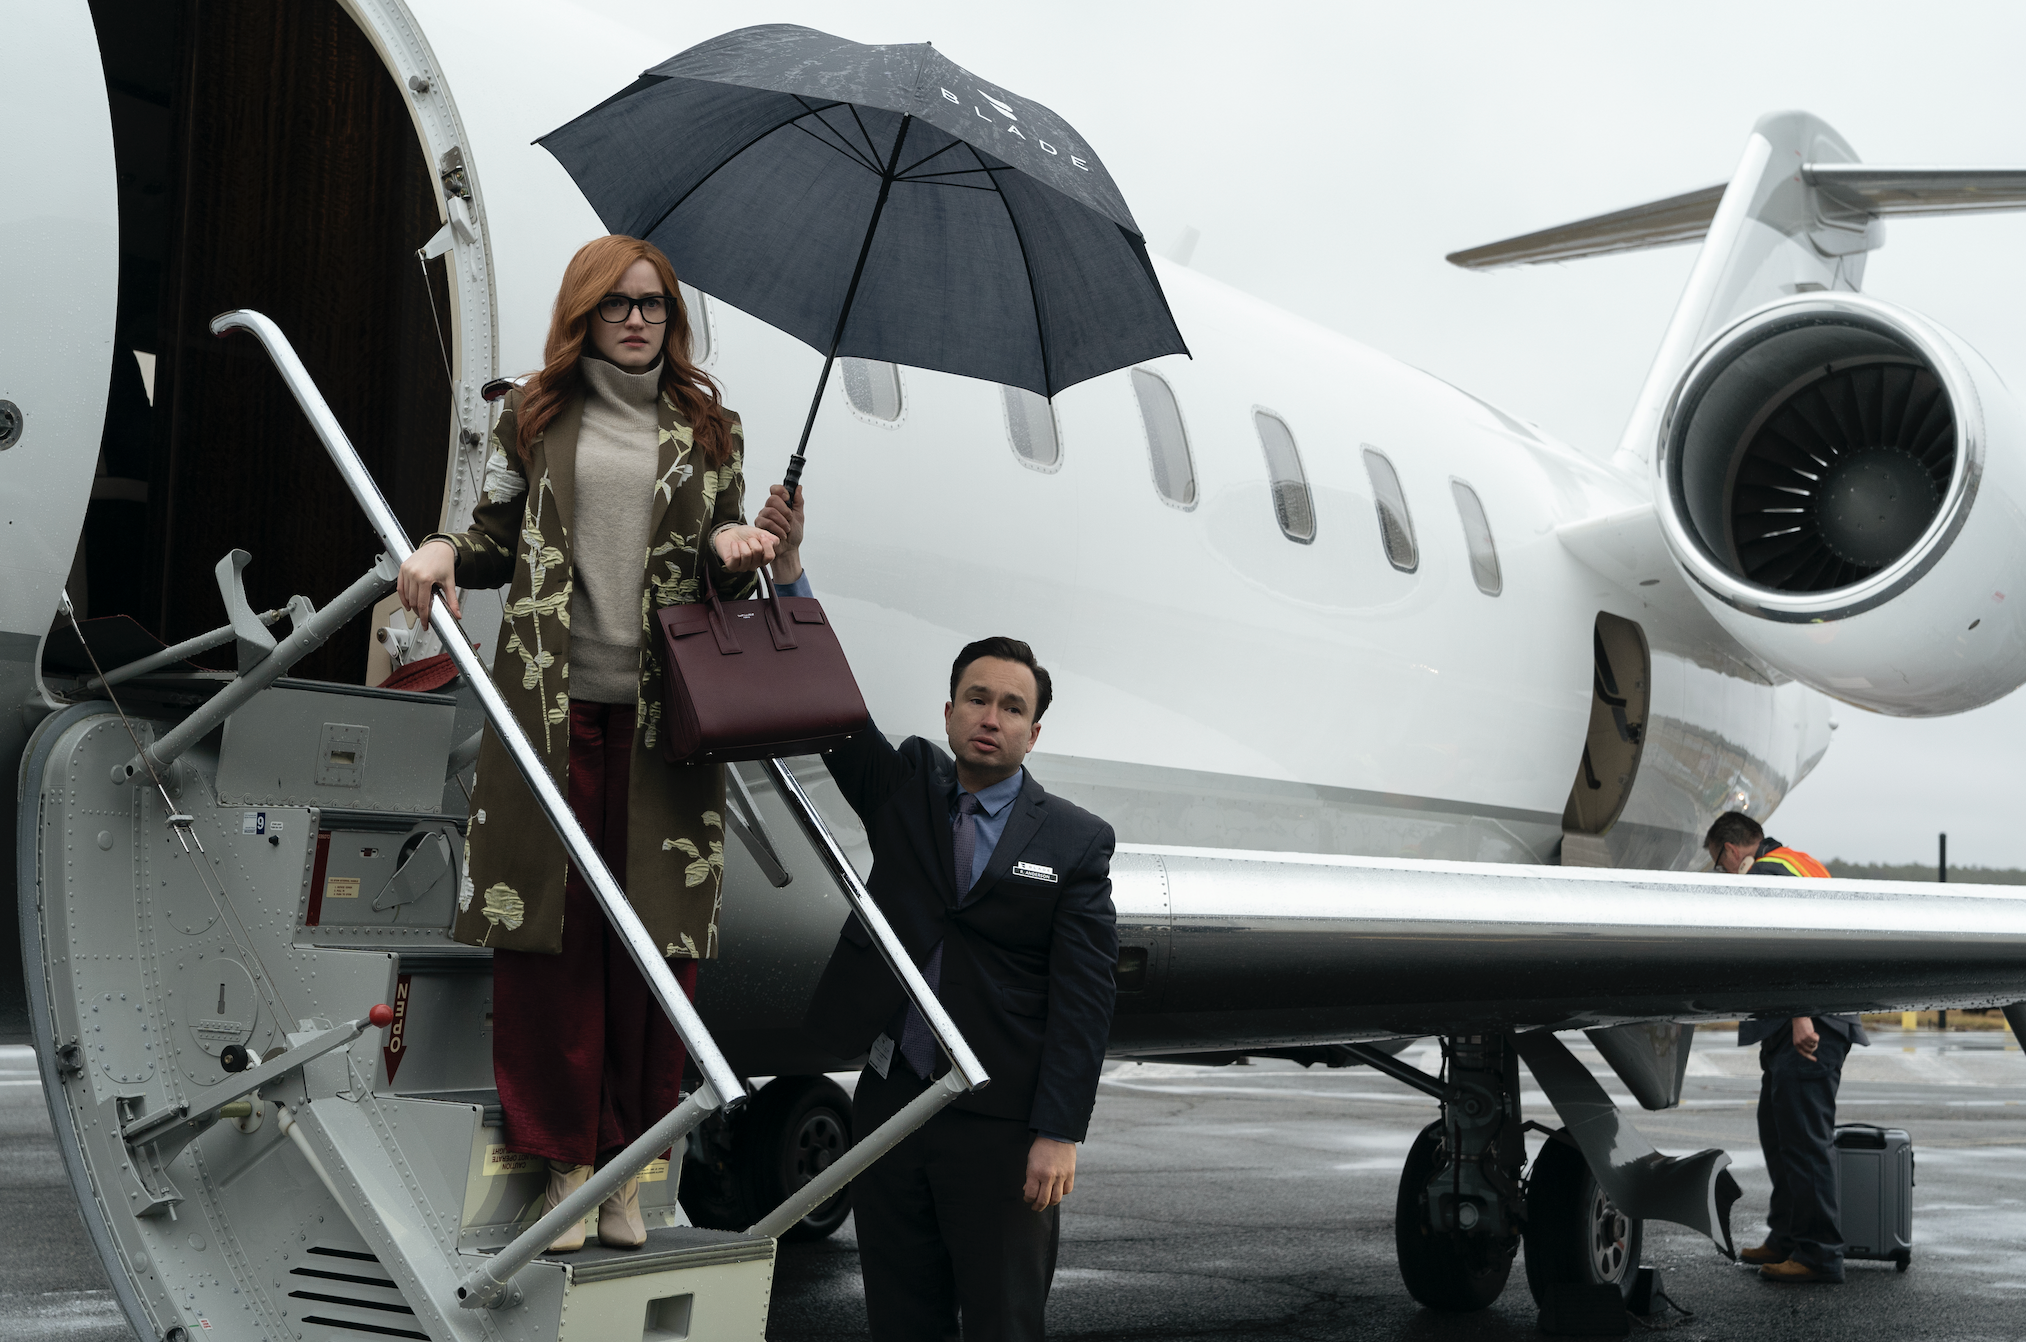 A red headed woman with a man holding an umbrella over her head boarding a jet